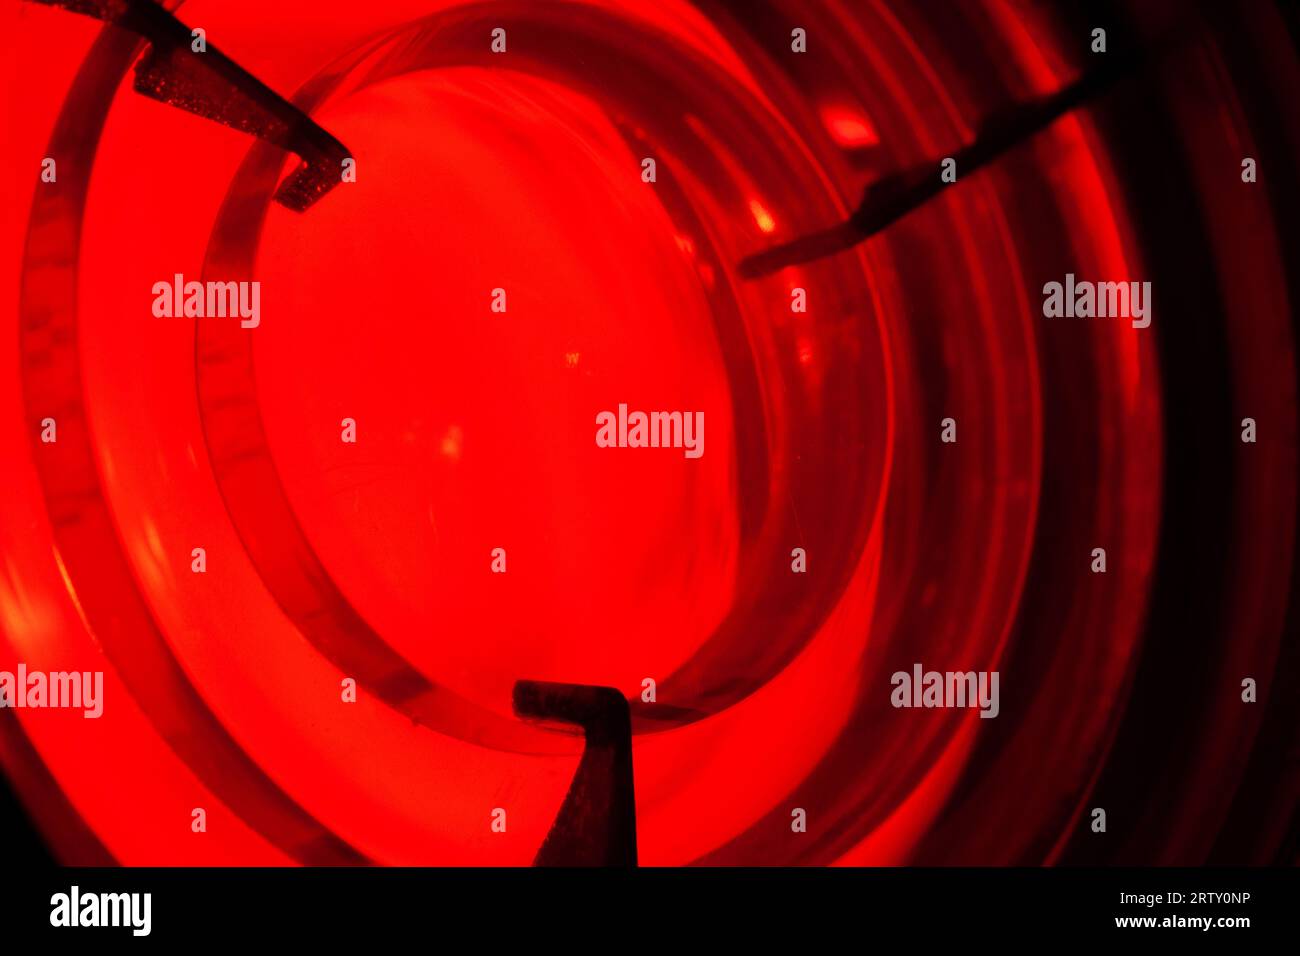 Red light is behind a Fresnel lens. It is a type of composite compact lens developed by the French physicist Augustin-Jean Fresnel for use in lighthou Stock Photo